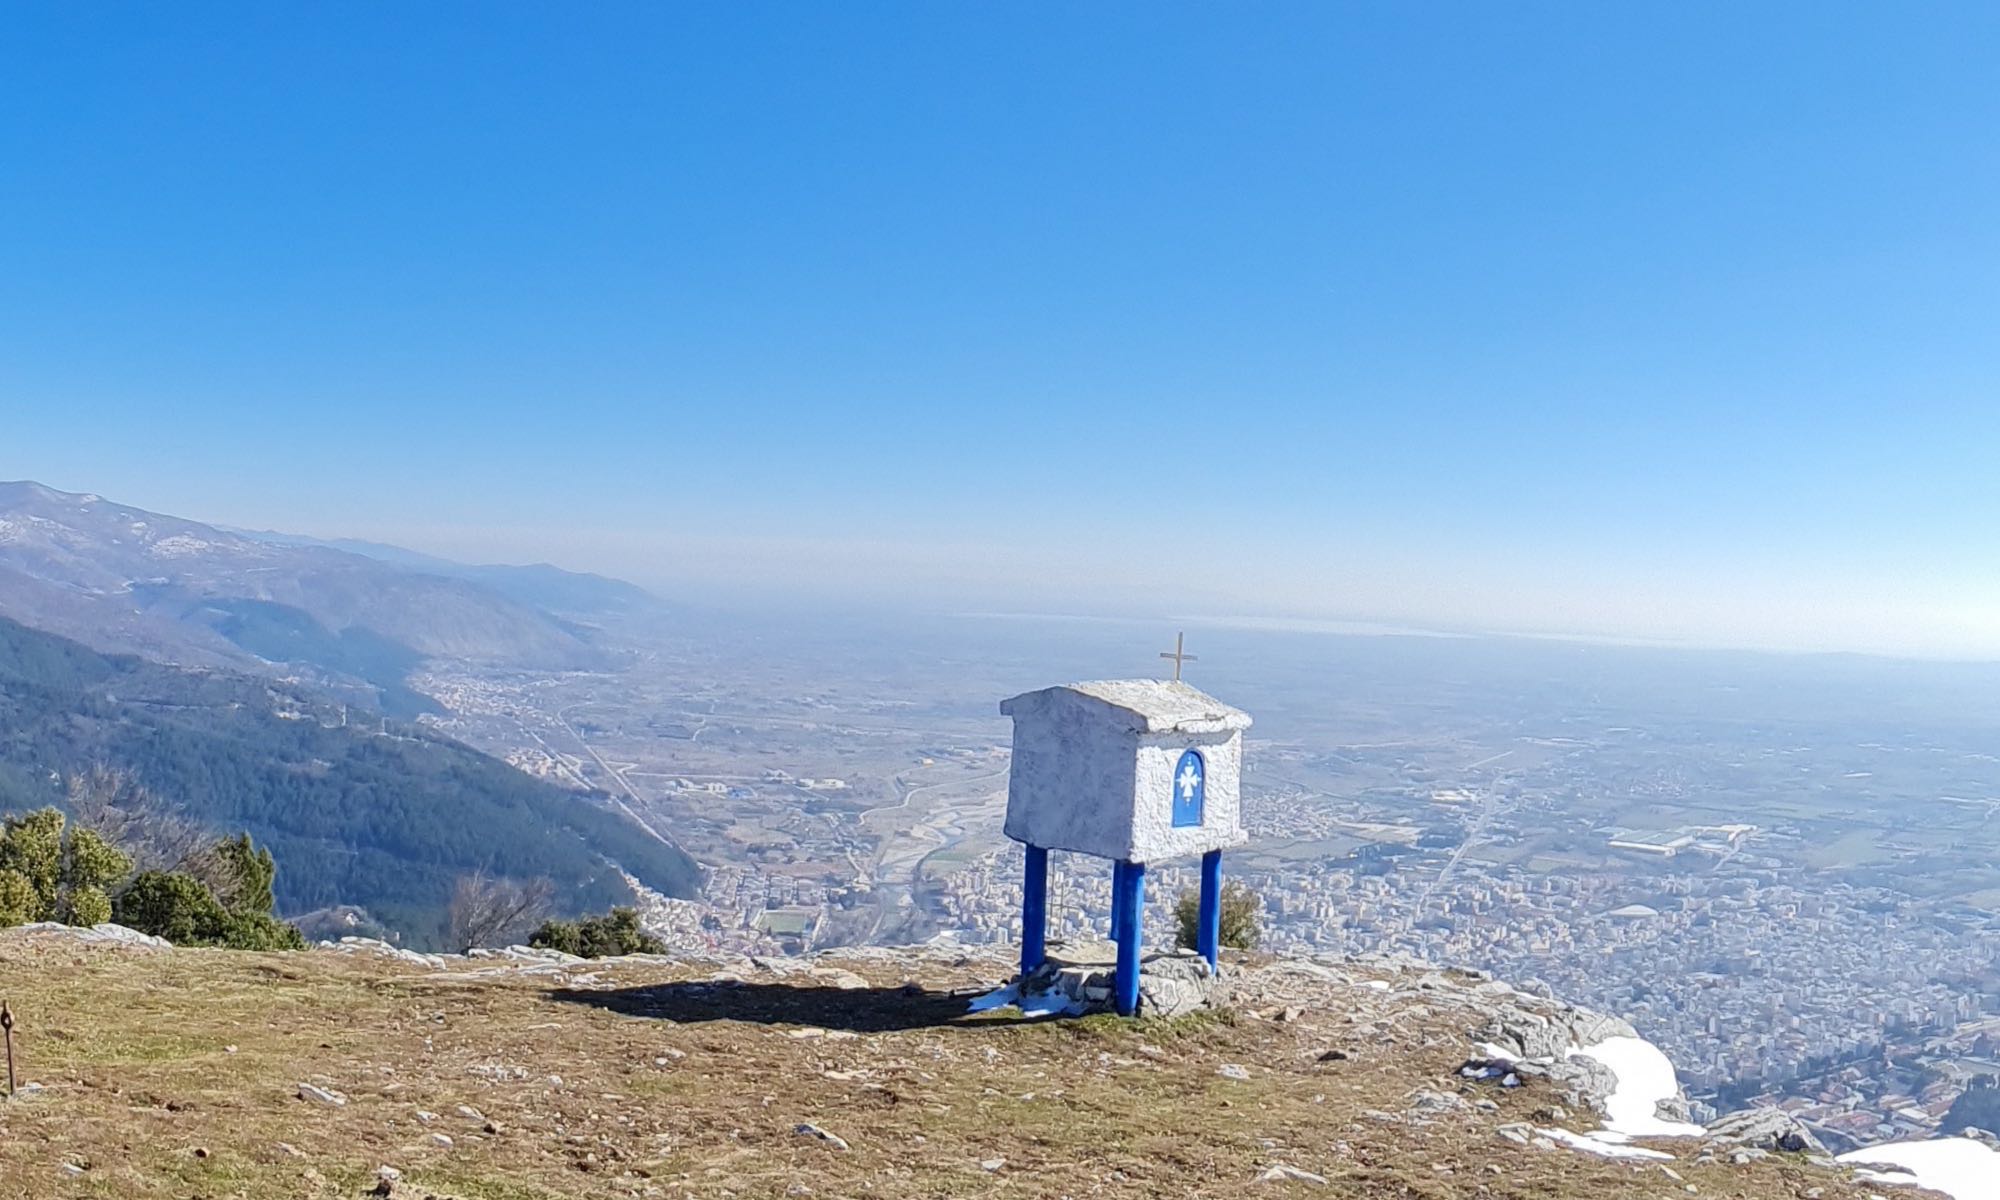 What are those small churches along the roads in Greece?